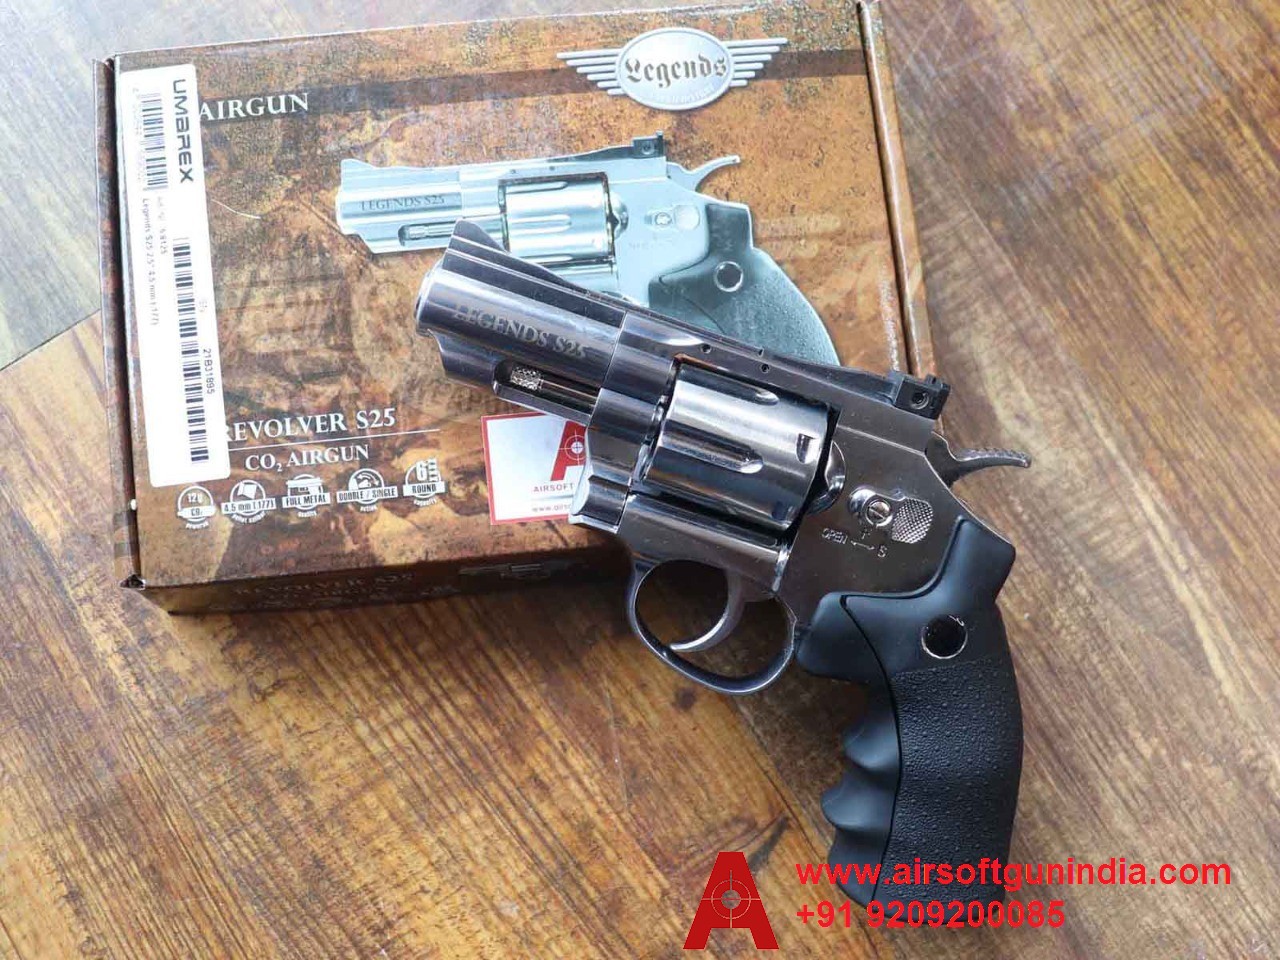 Legends S25 2.5 Inch Co2 Pellets .177Cal, 4.5mm Air Revolver By Airsoft Gun India